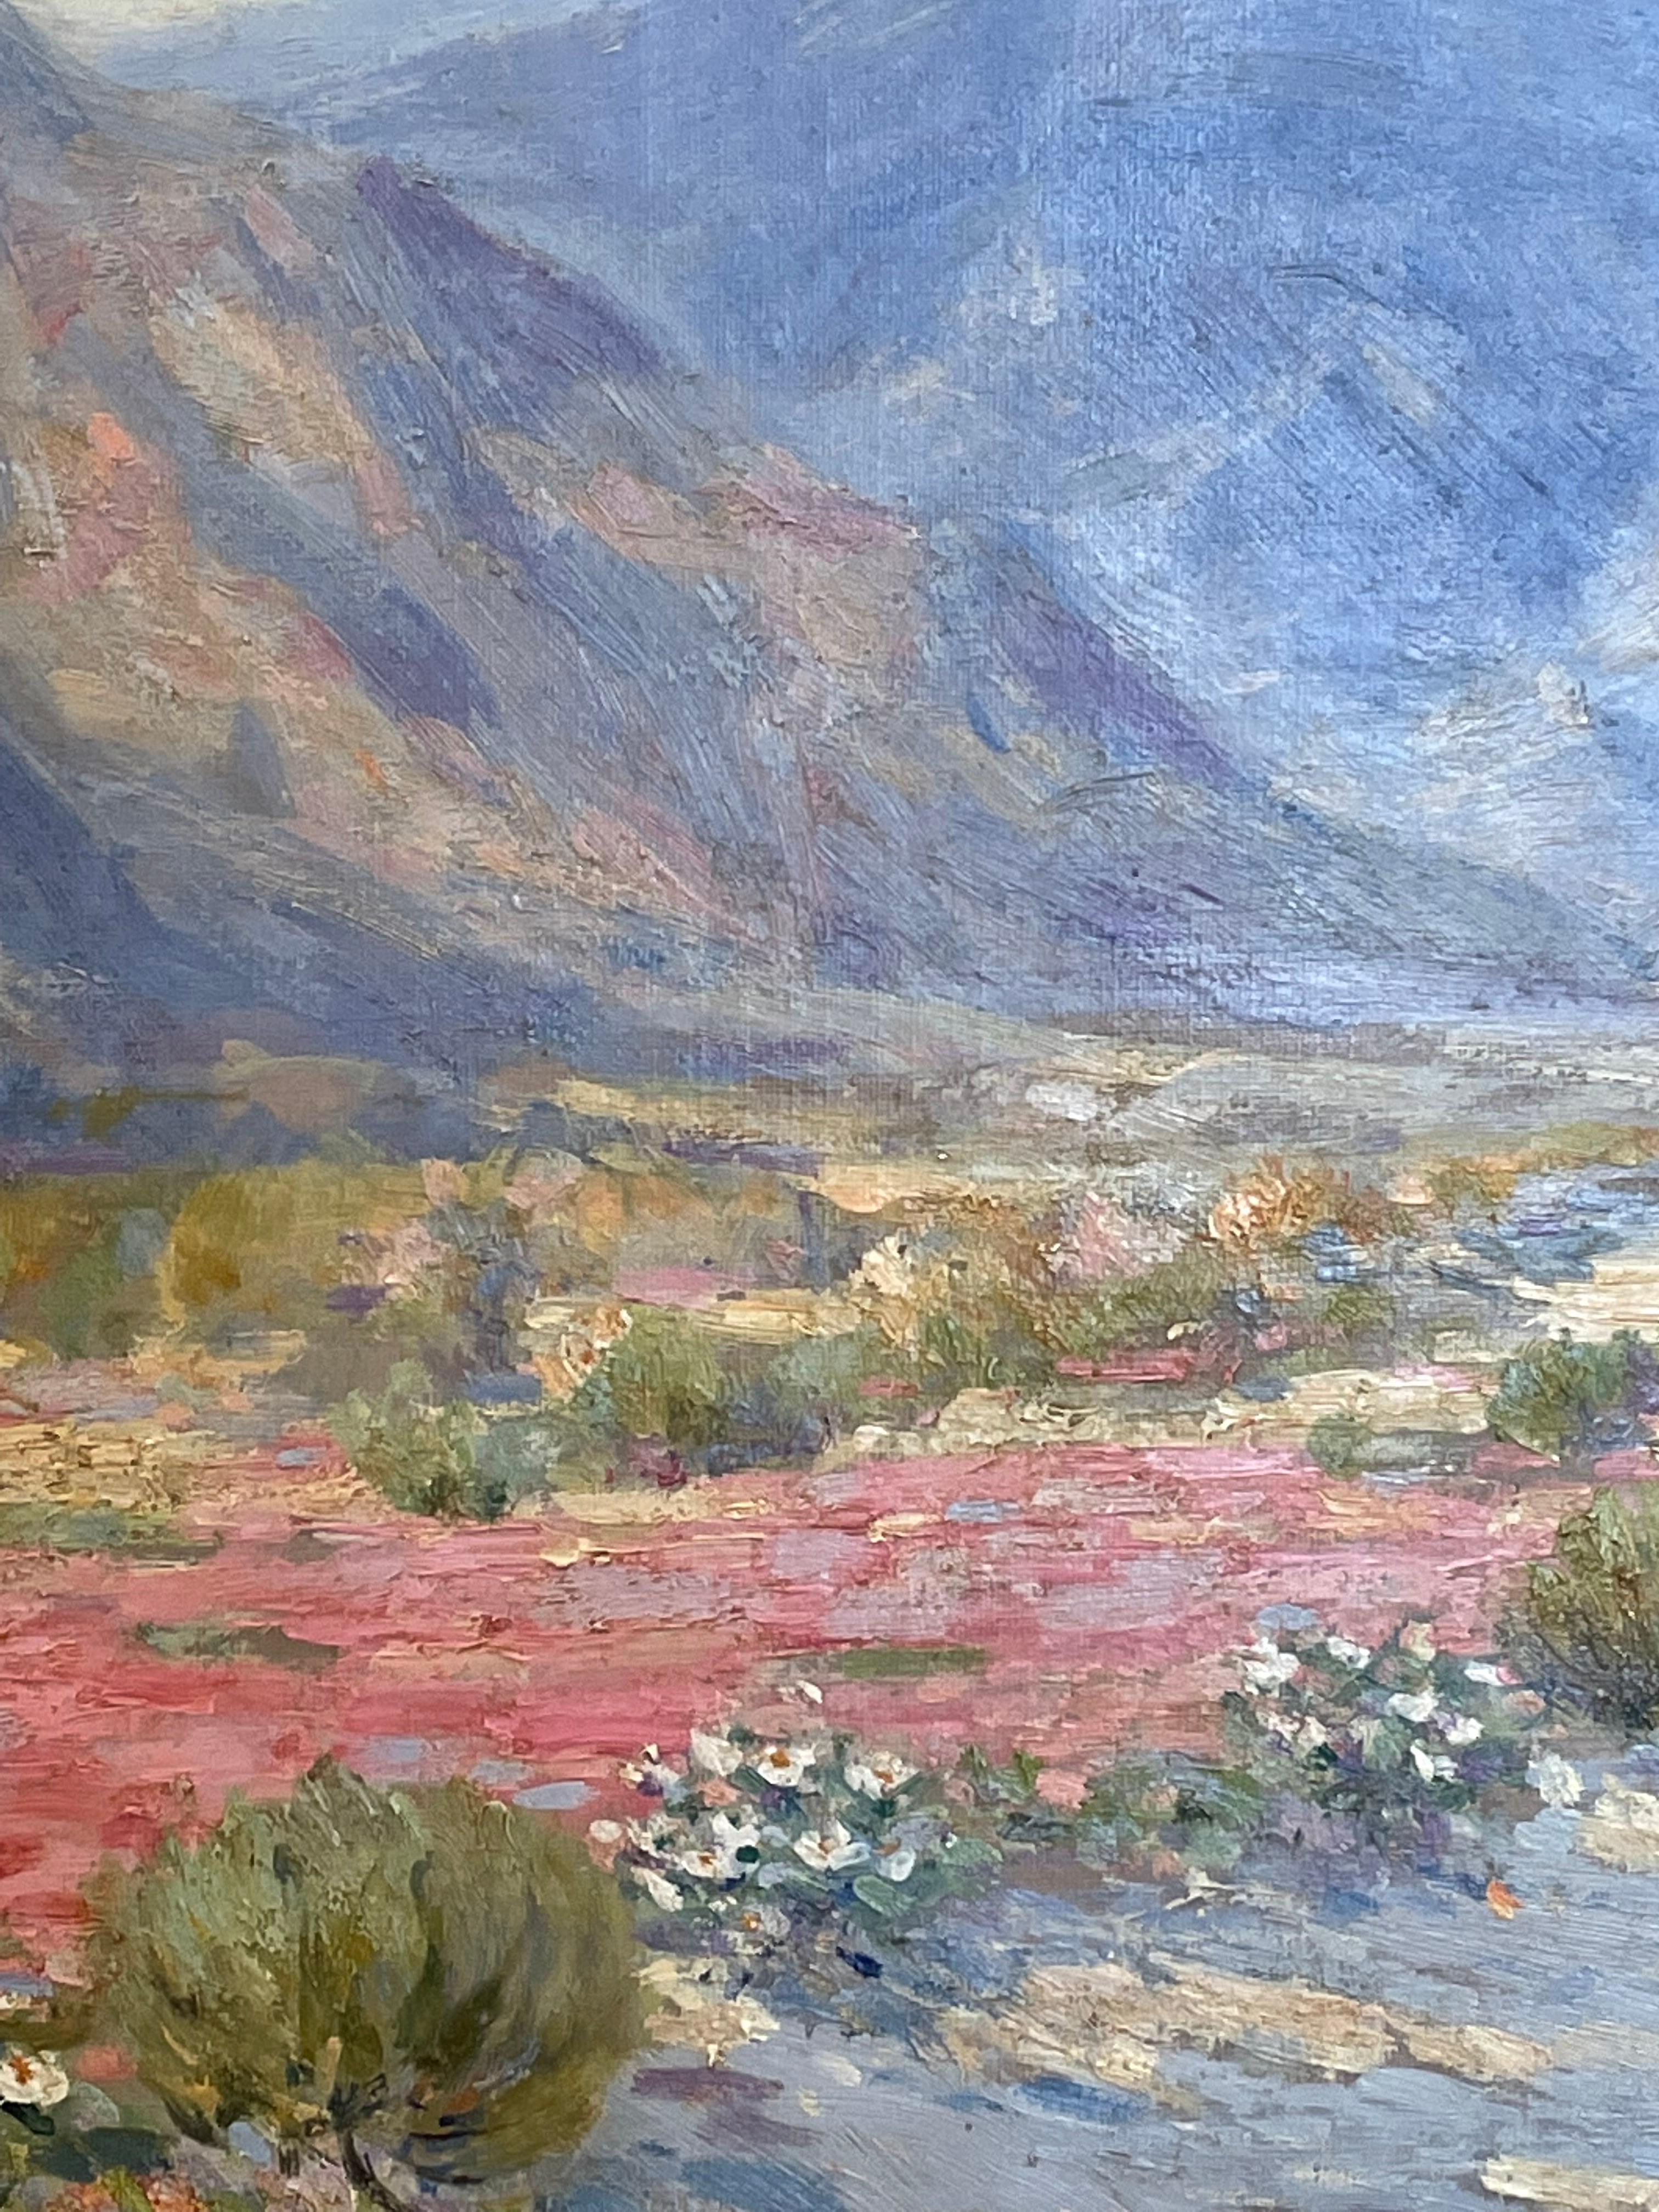 Wild Flowers Verbena in High Desert Palm Springs CA Pink & White Snowy Mountains - American Impressionist Painting by Frederick Carl Smith